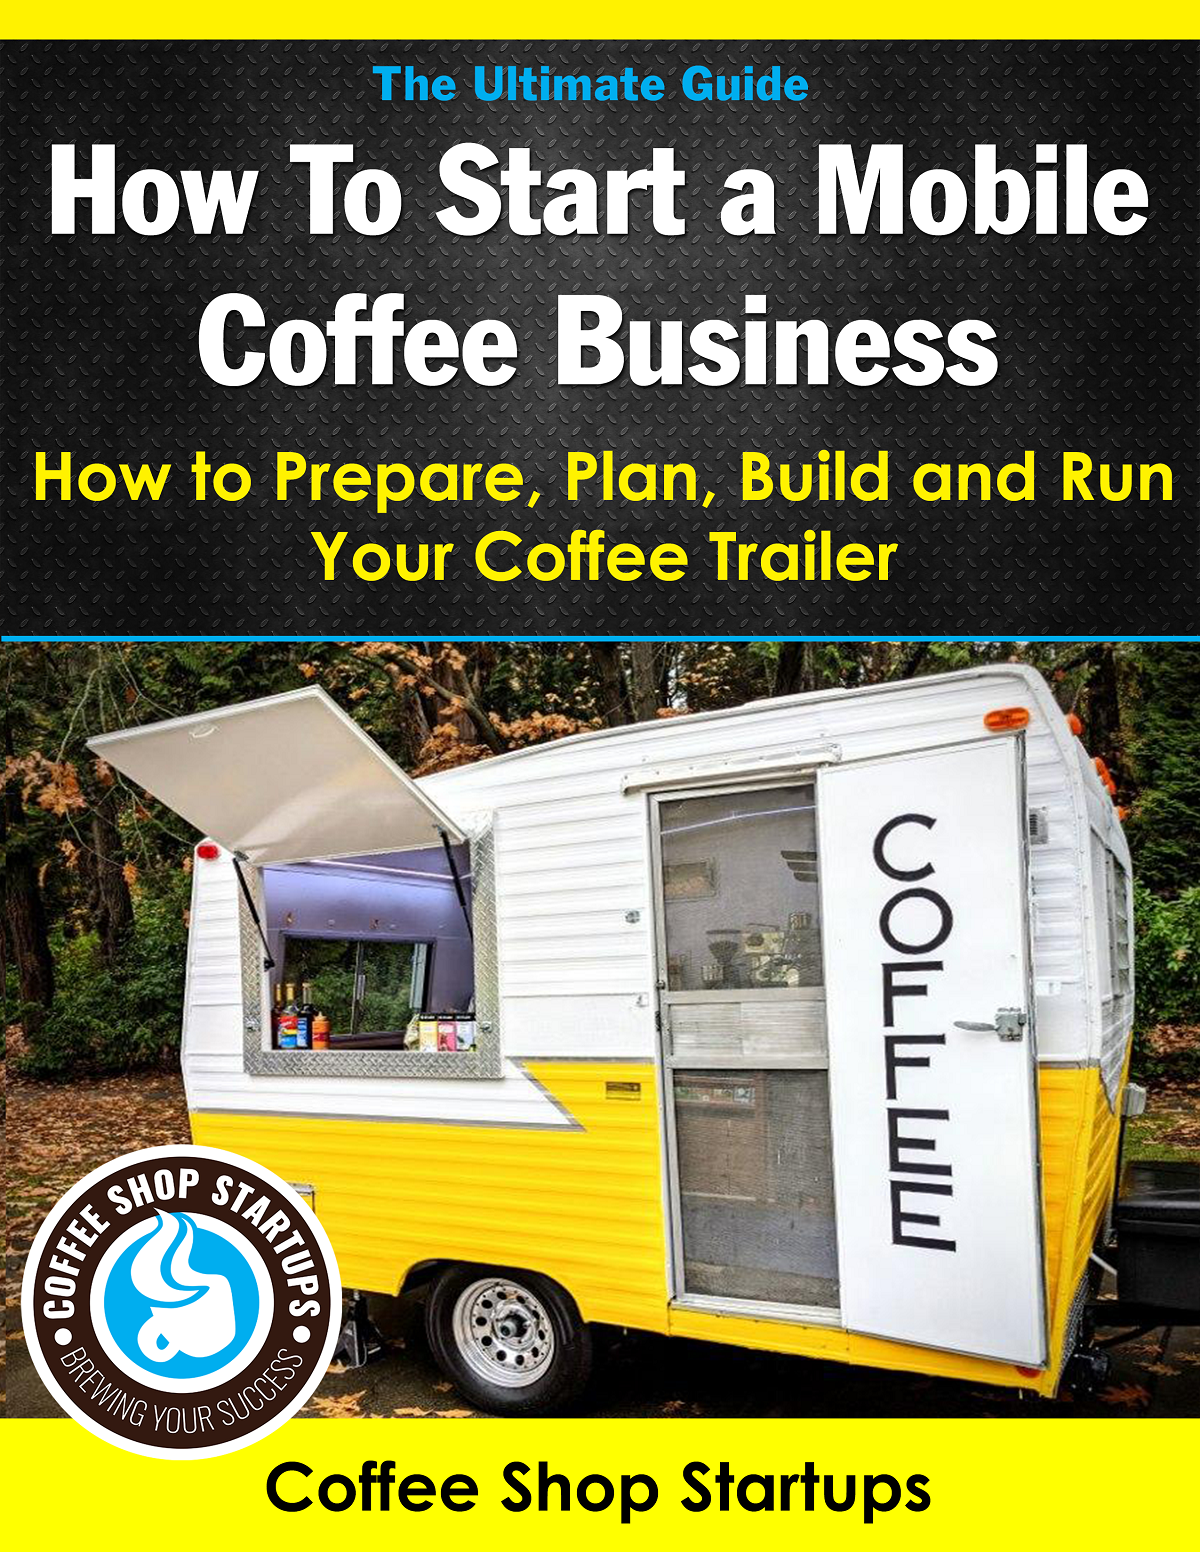 How to Start a Mobile Coffee Business